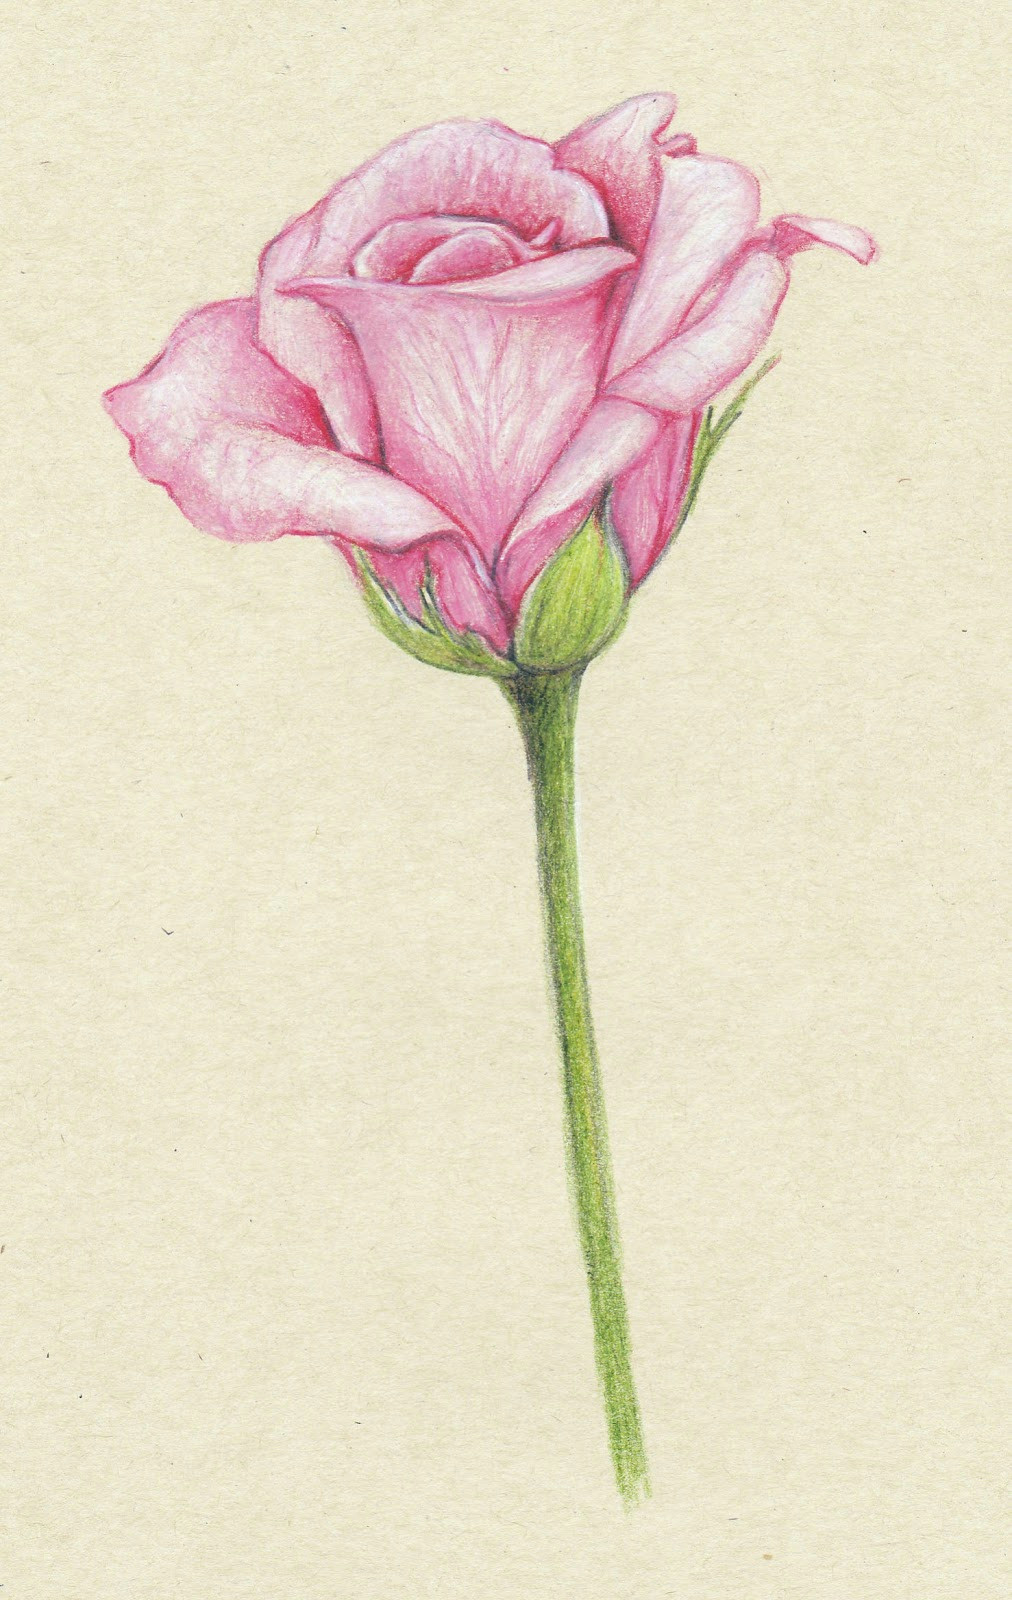 Drawing Colored Flowers Easy 61 Best Art Pencil Drawings Of Flowers Images Pencil Drawings